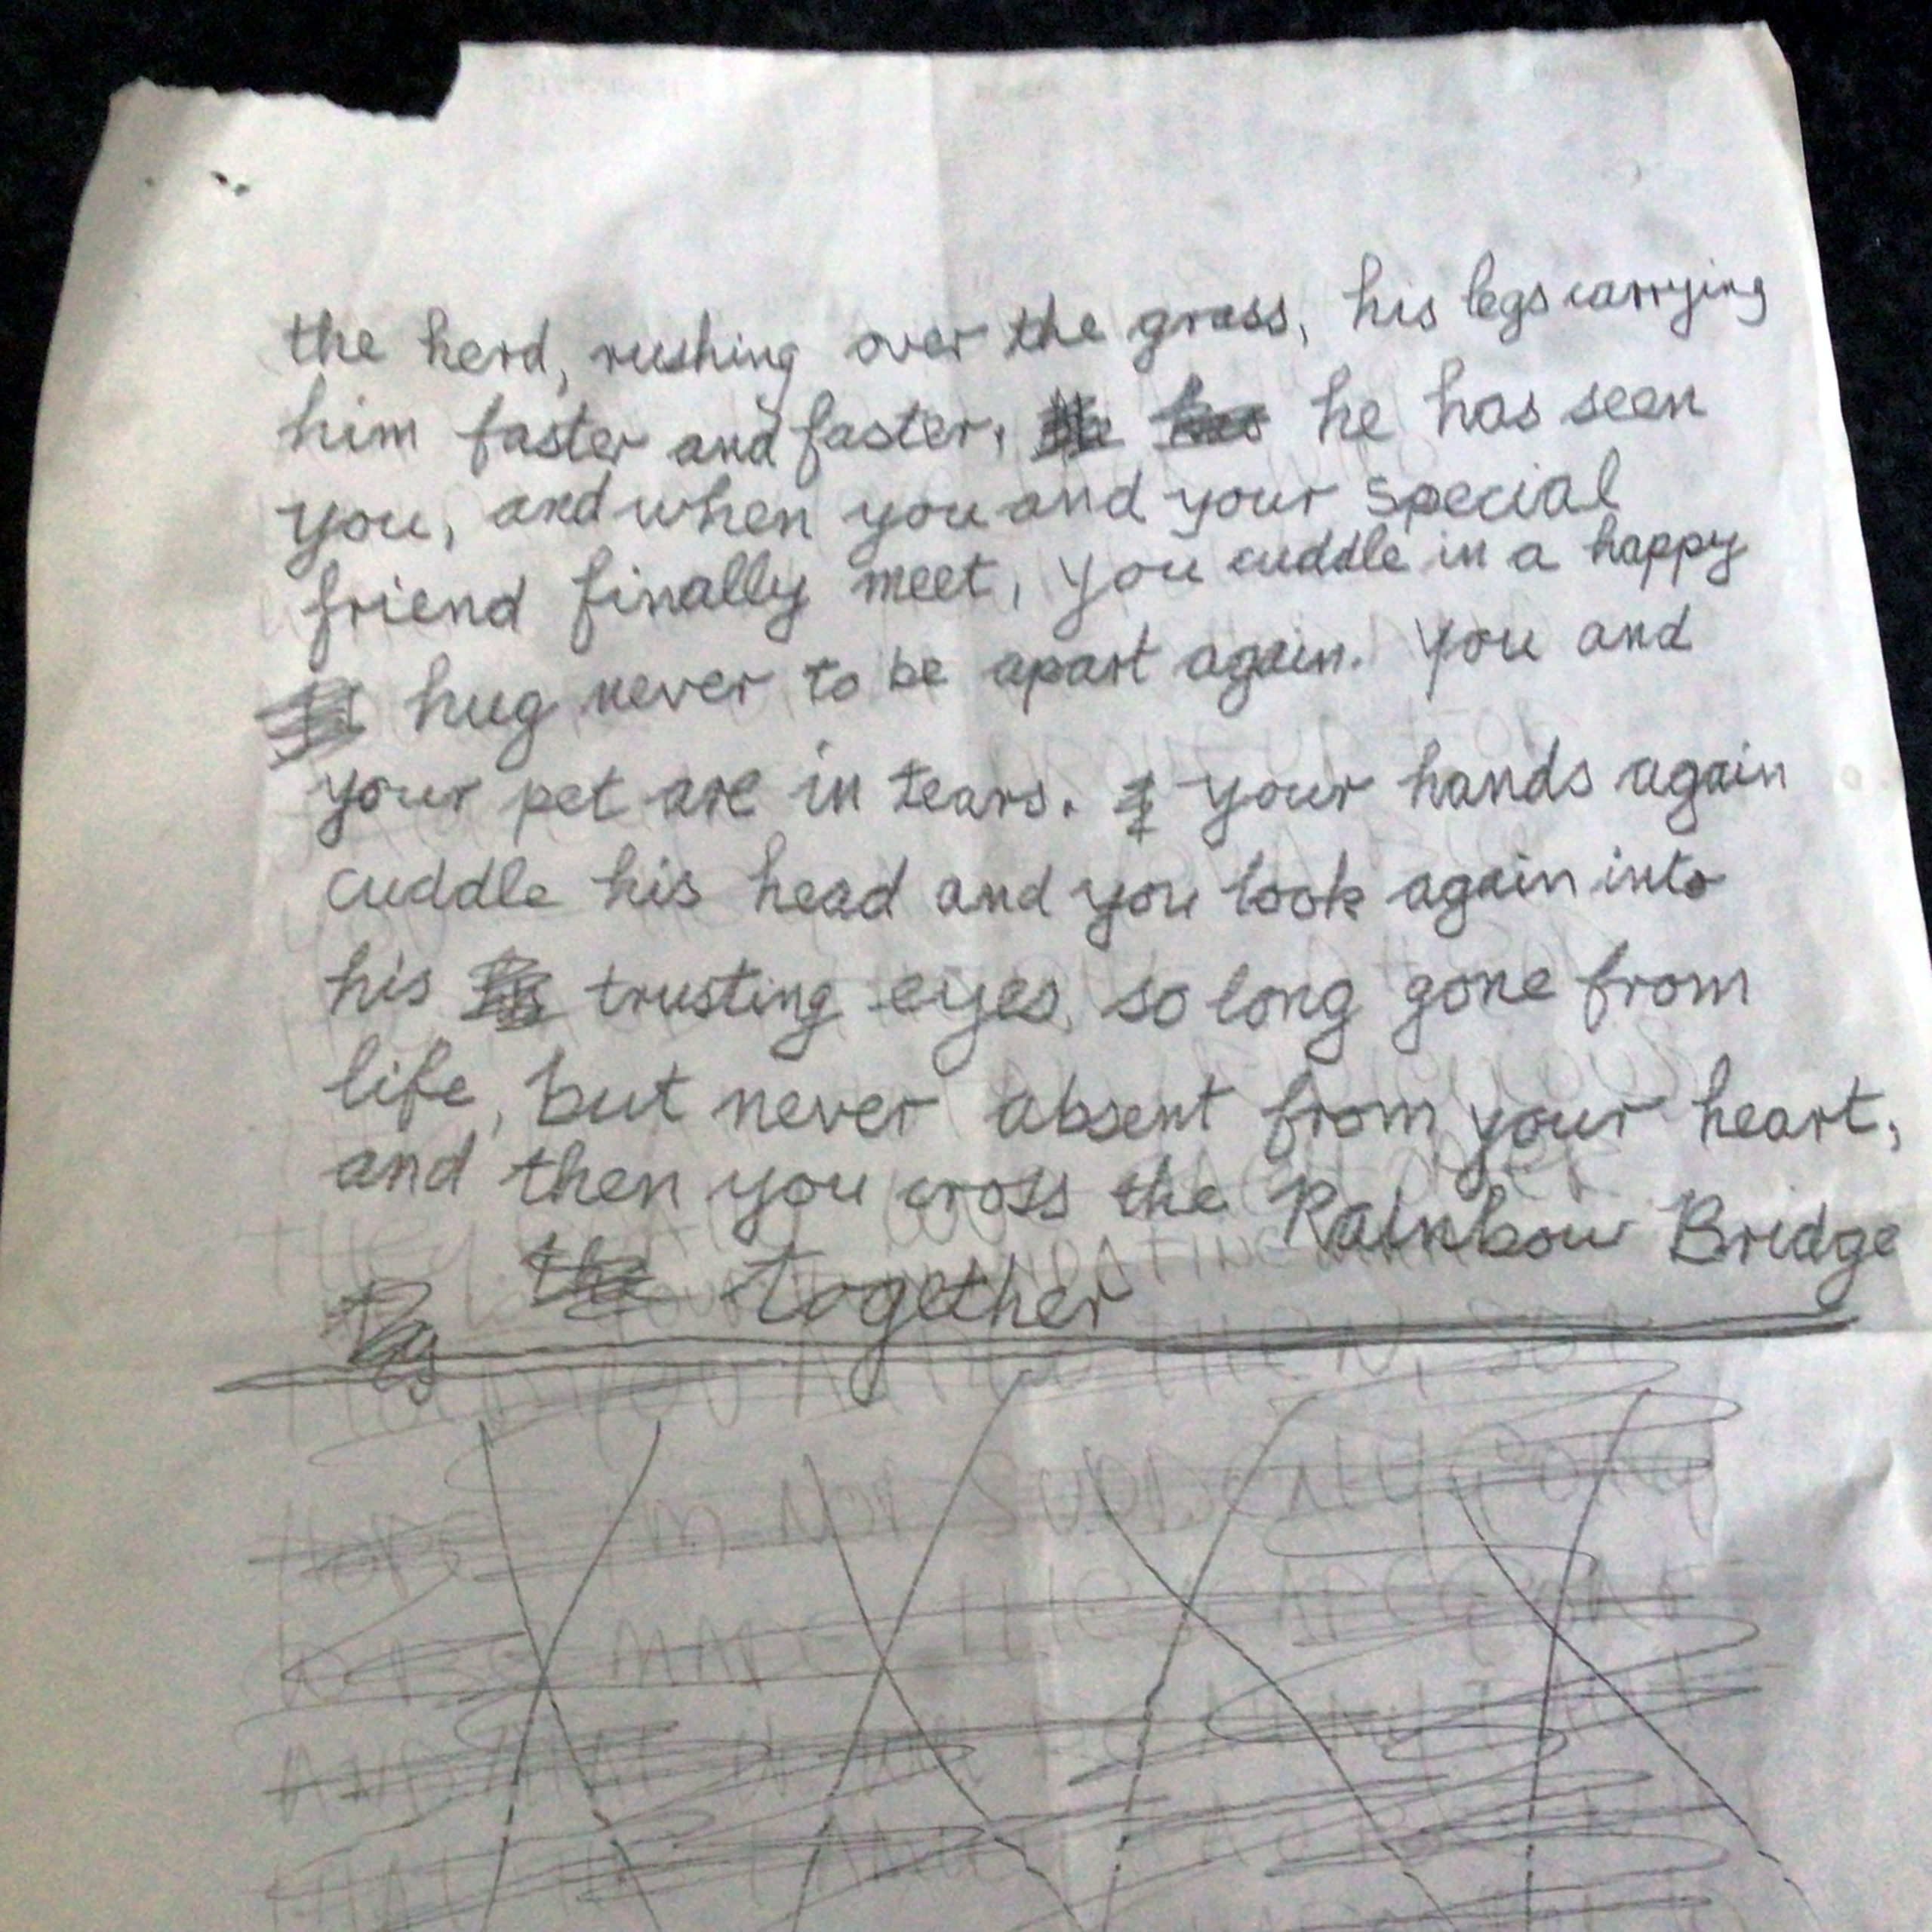 The rear view of Edna's original handwritten version of the Rainbow Bridge, with her sister's writing crossed out at the bottom.